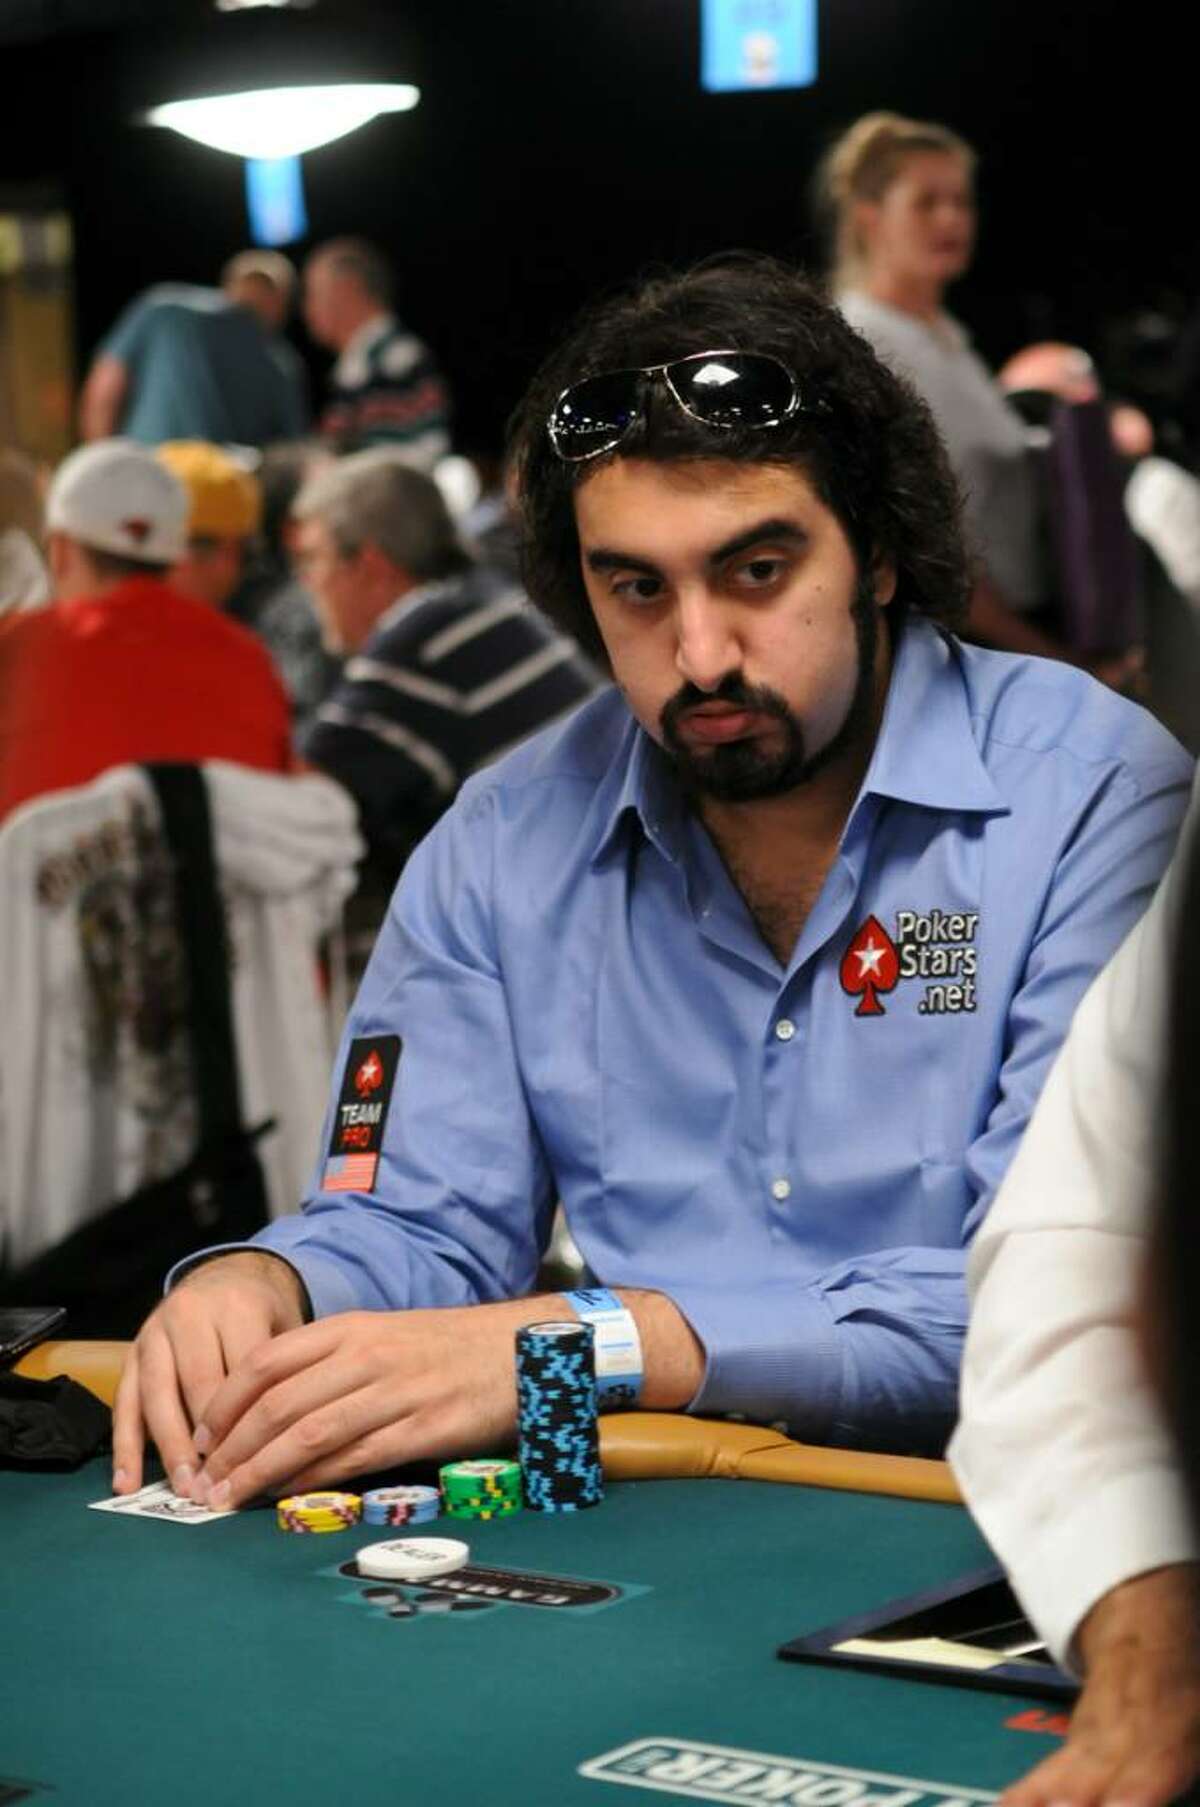 Hevad Khan attended UAlbany 2004-2006 and was a World Series of Poker finalist in 2007. (Courtesy IMPDI)